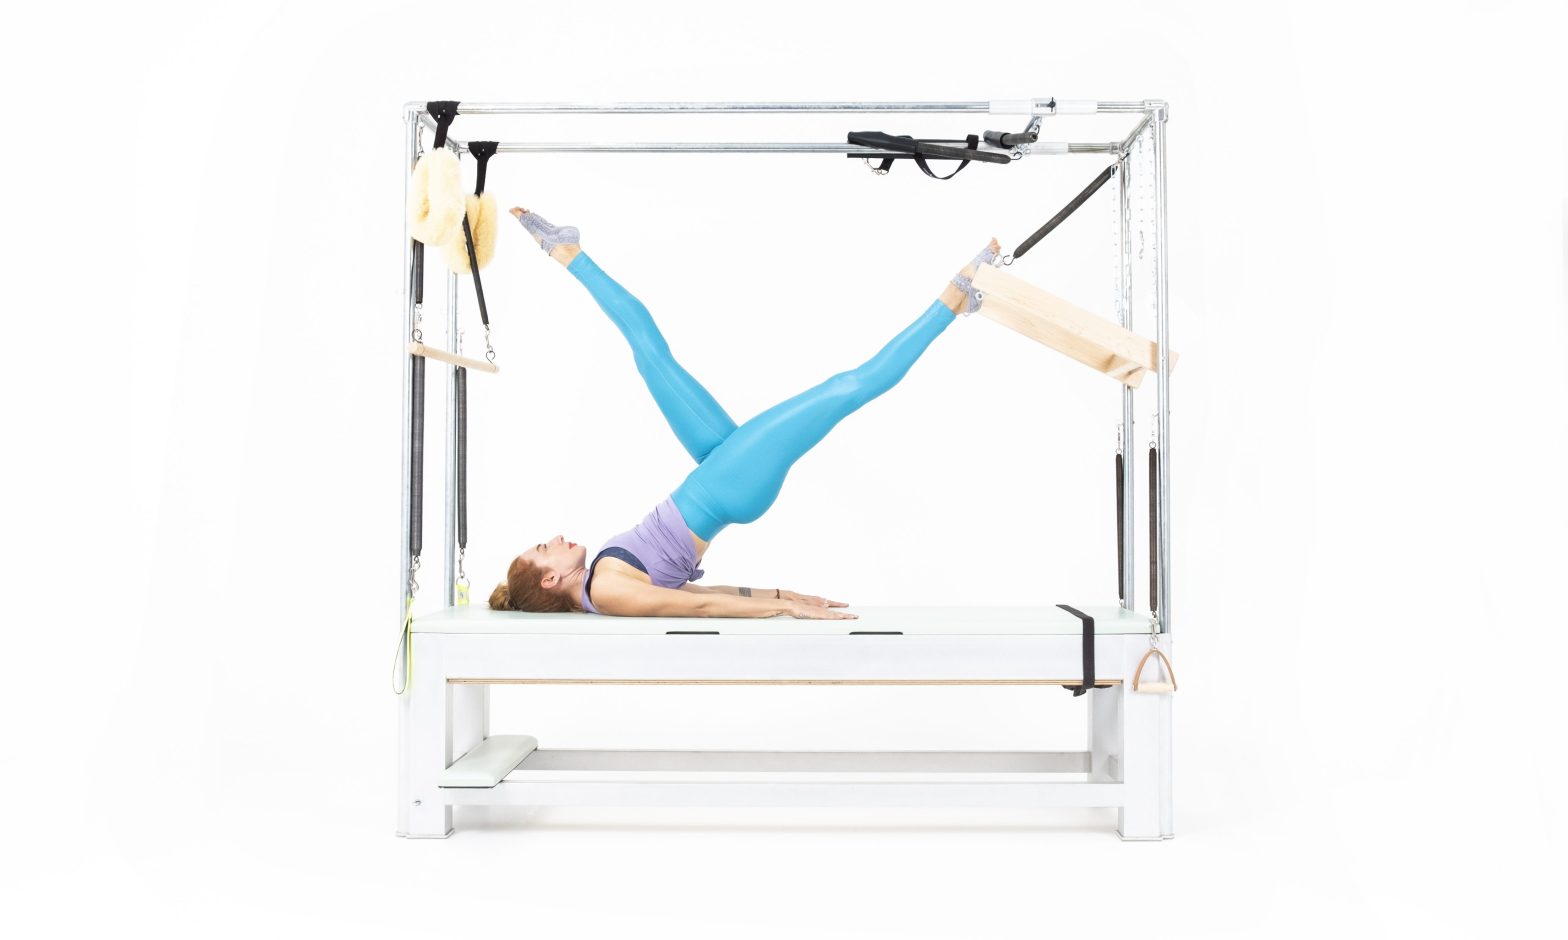 Shoulder Roll Down with Push Thru Bar on the Cadillac or Tower Online Pilates Classes